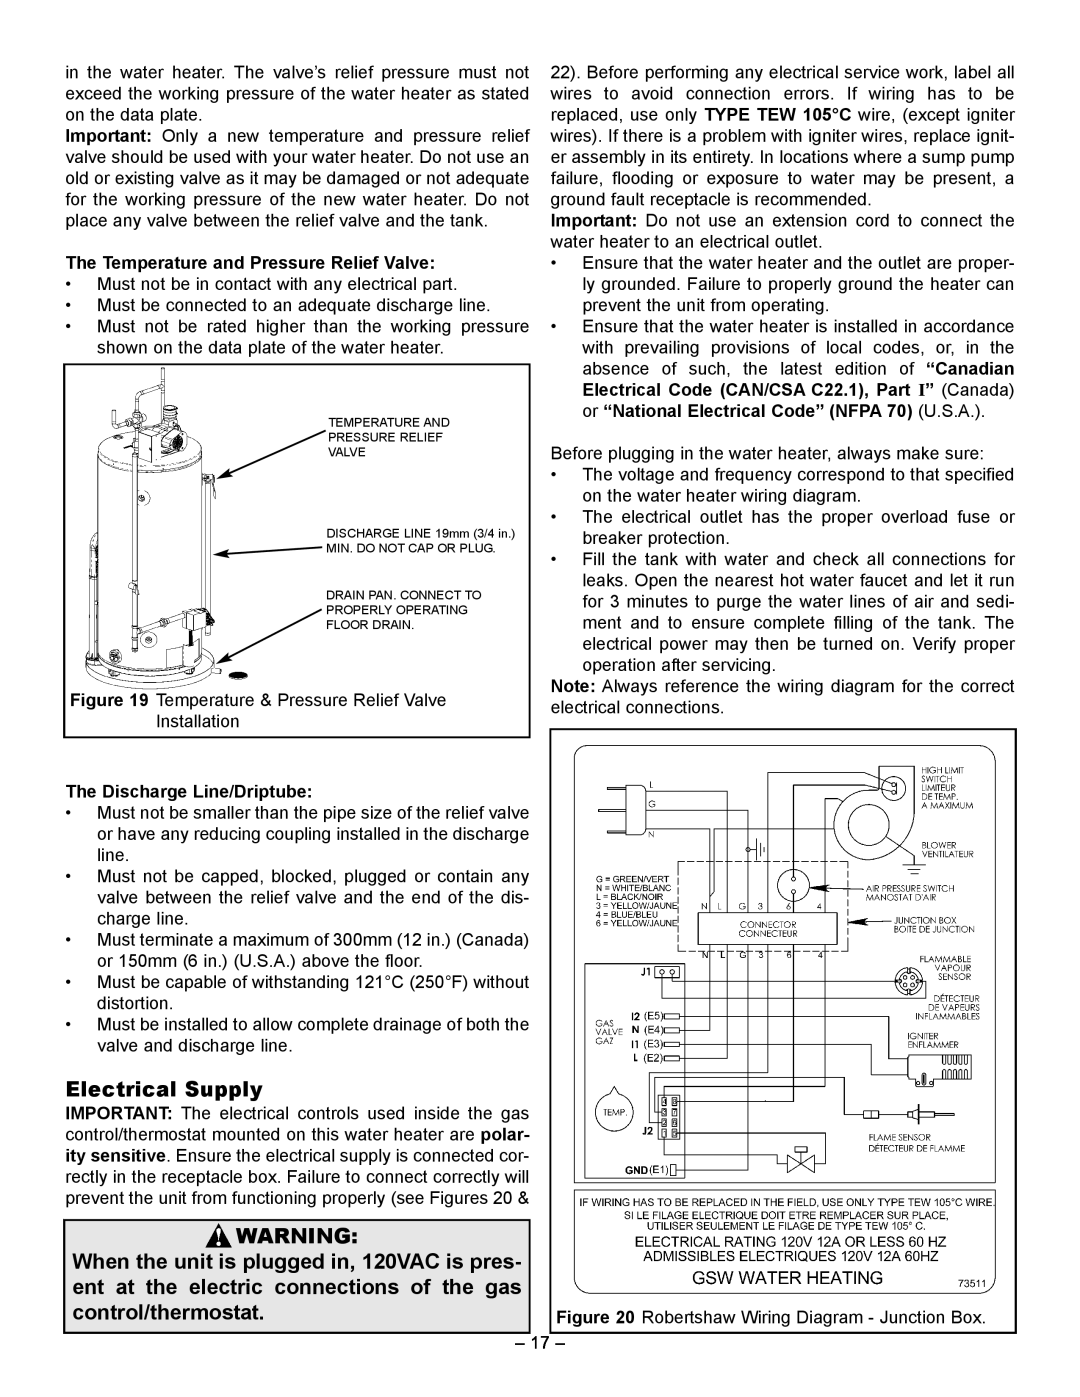 GSW 5065 manual Electrical Supply, When the unit is plugged in, 120VAC is pres, ent at the electric connections of the gas 